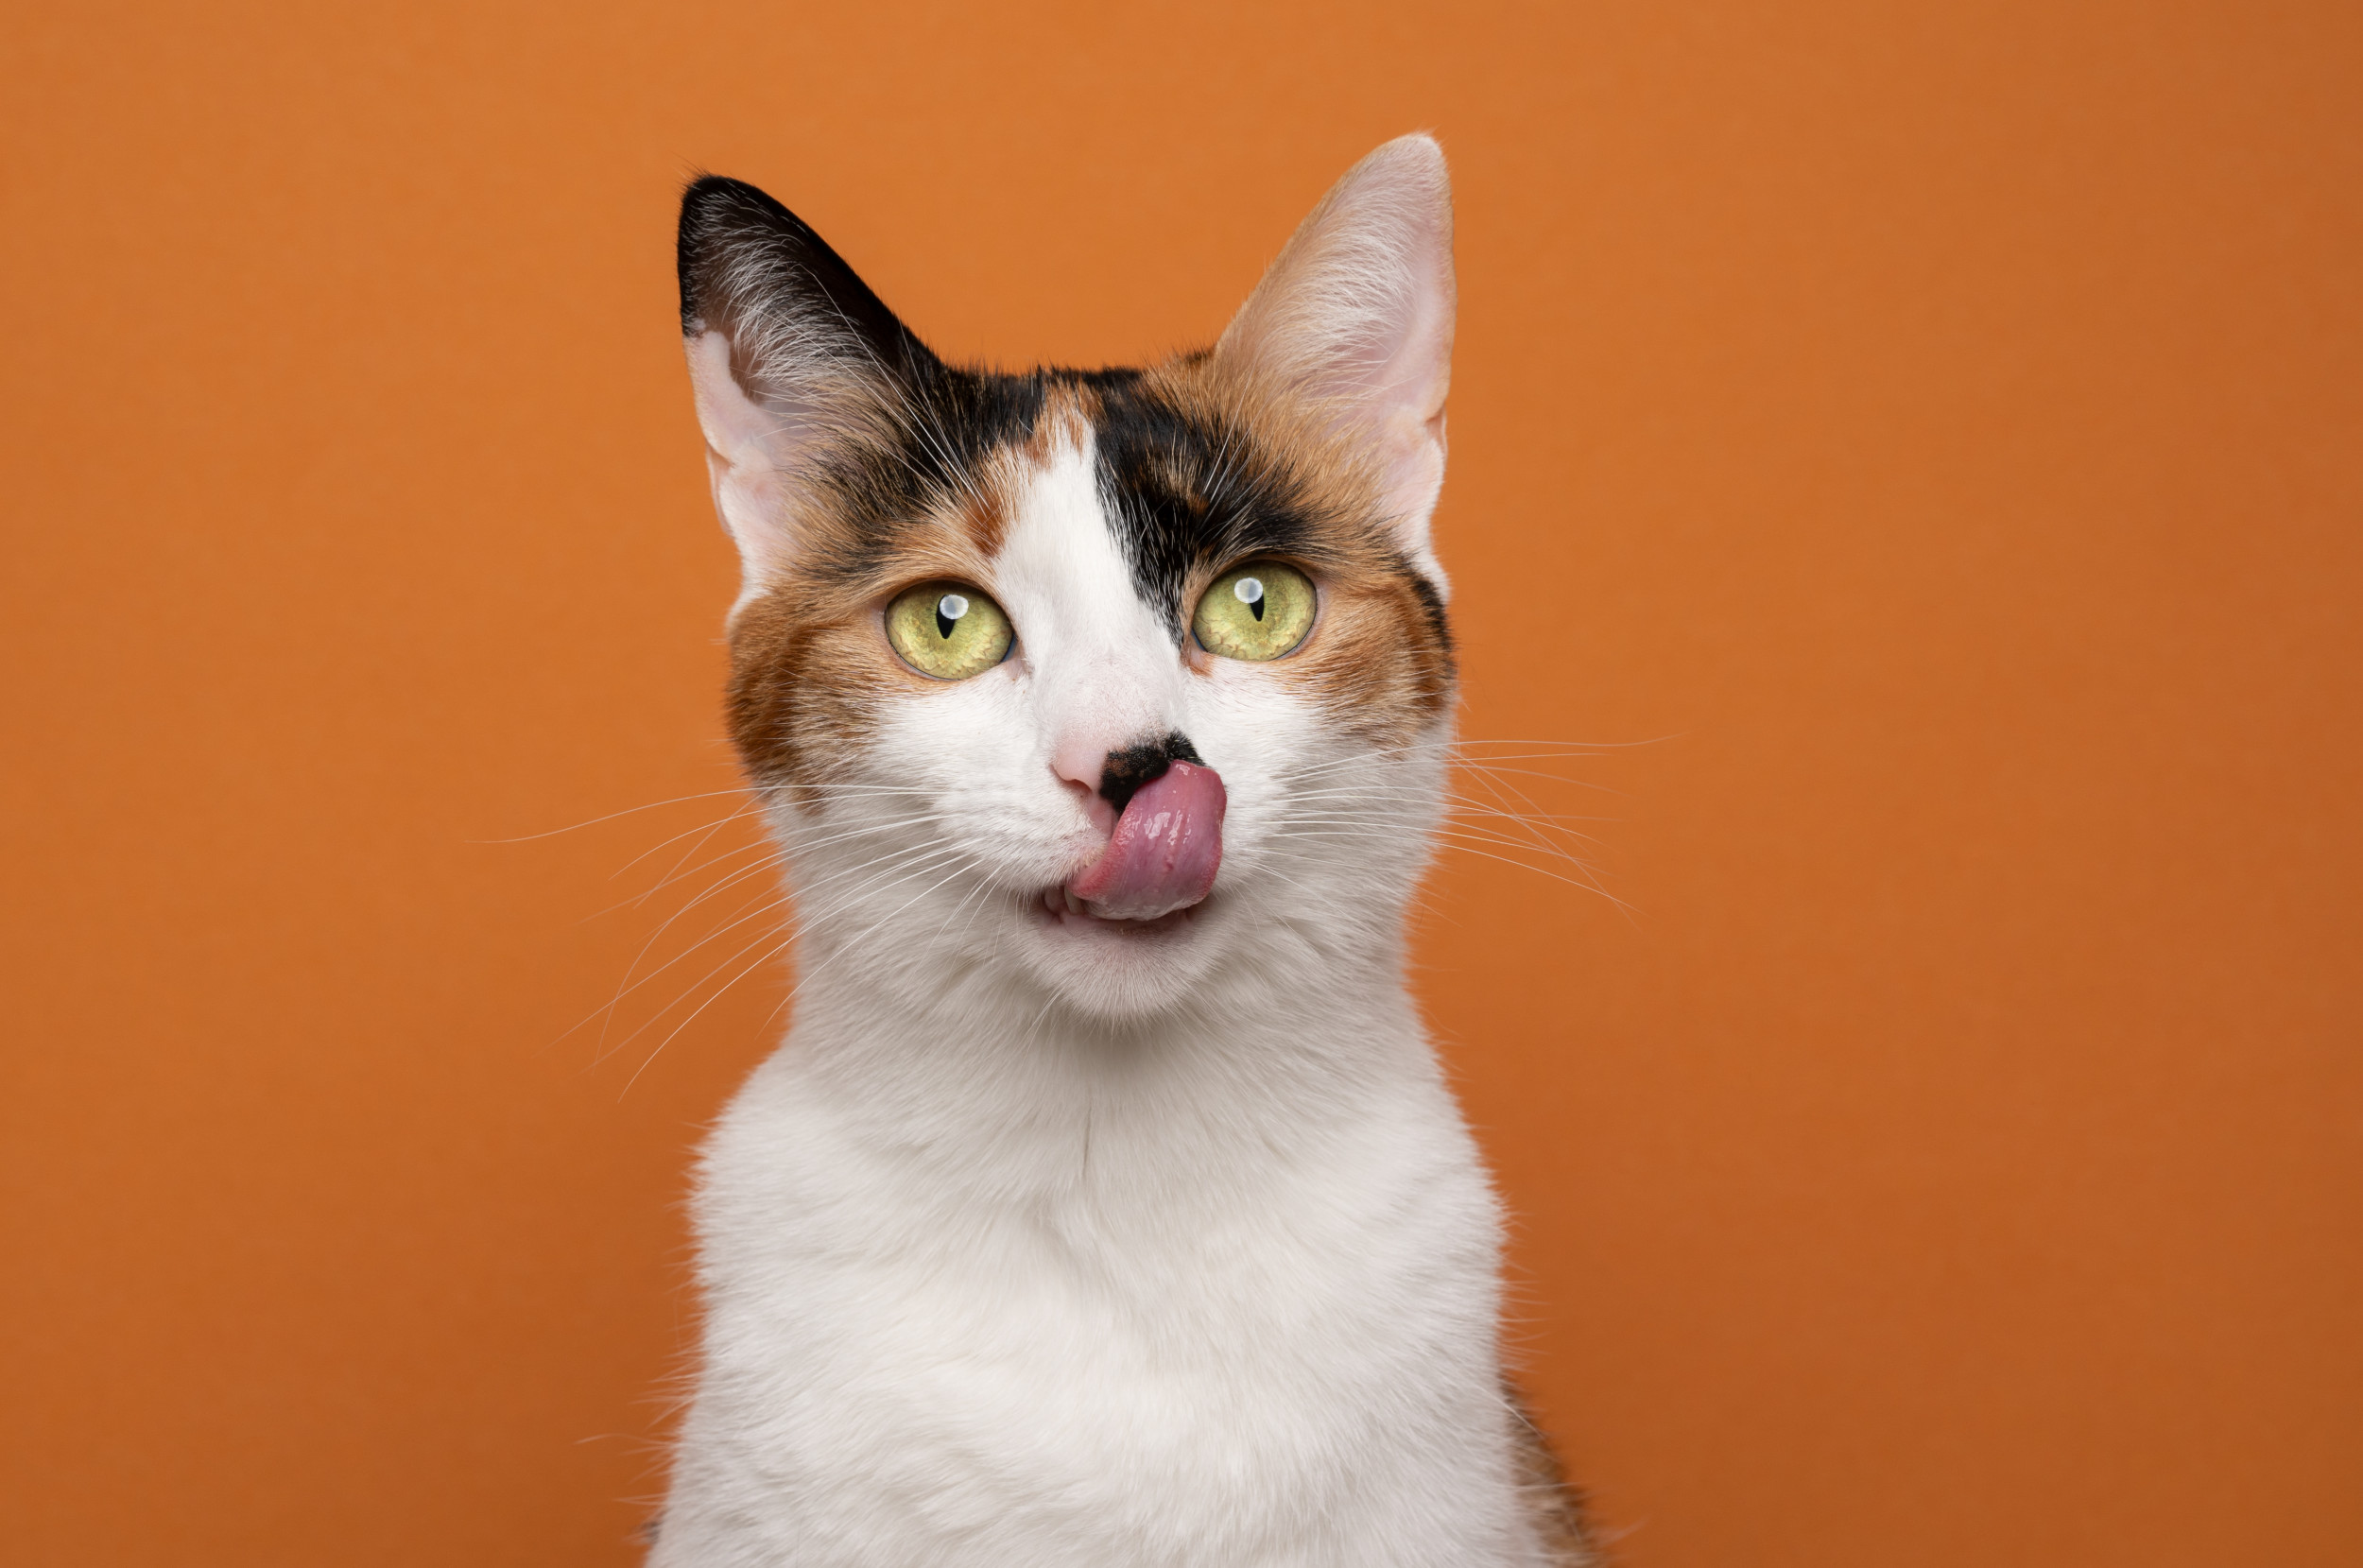 Cat Sticking Out Tongue Leaves Internet In Hysterics: 'Never Change'